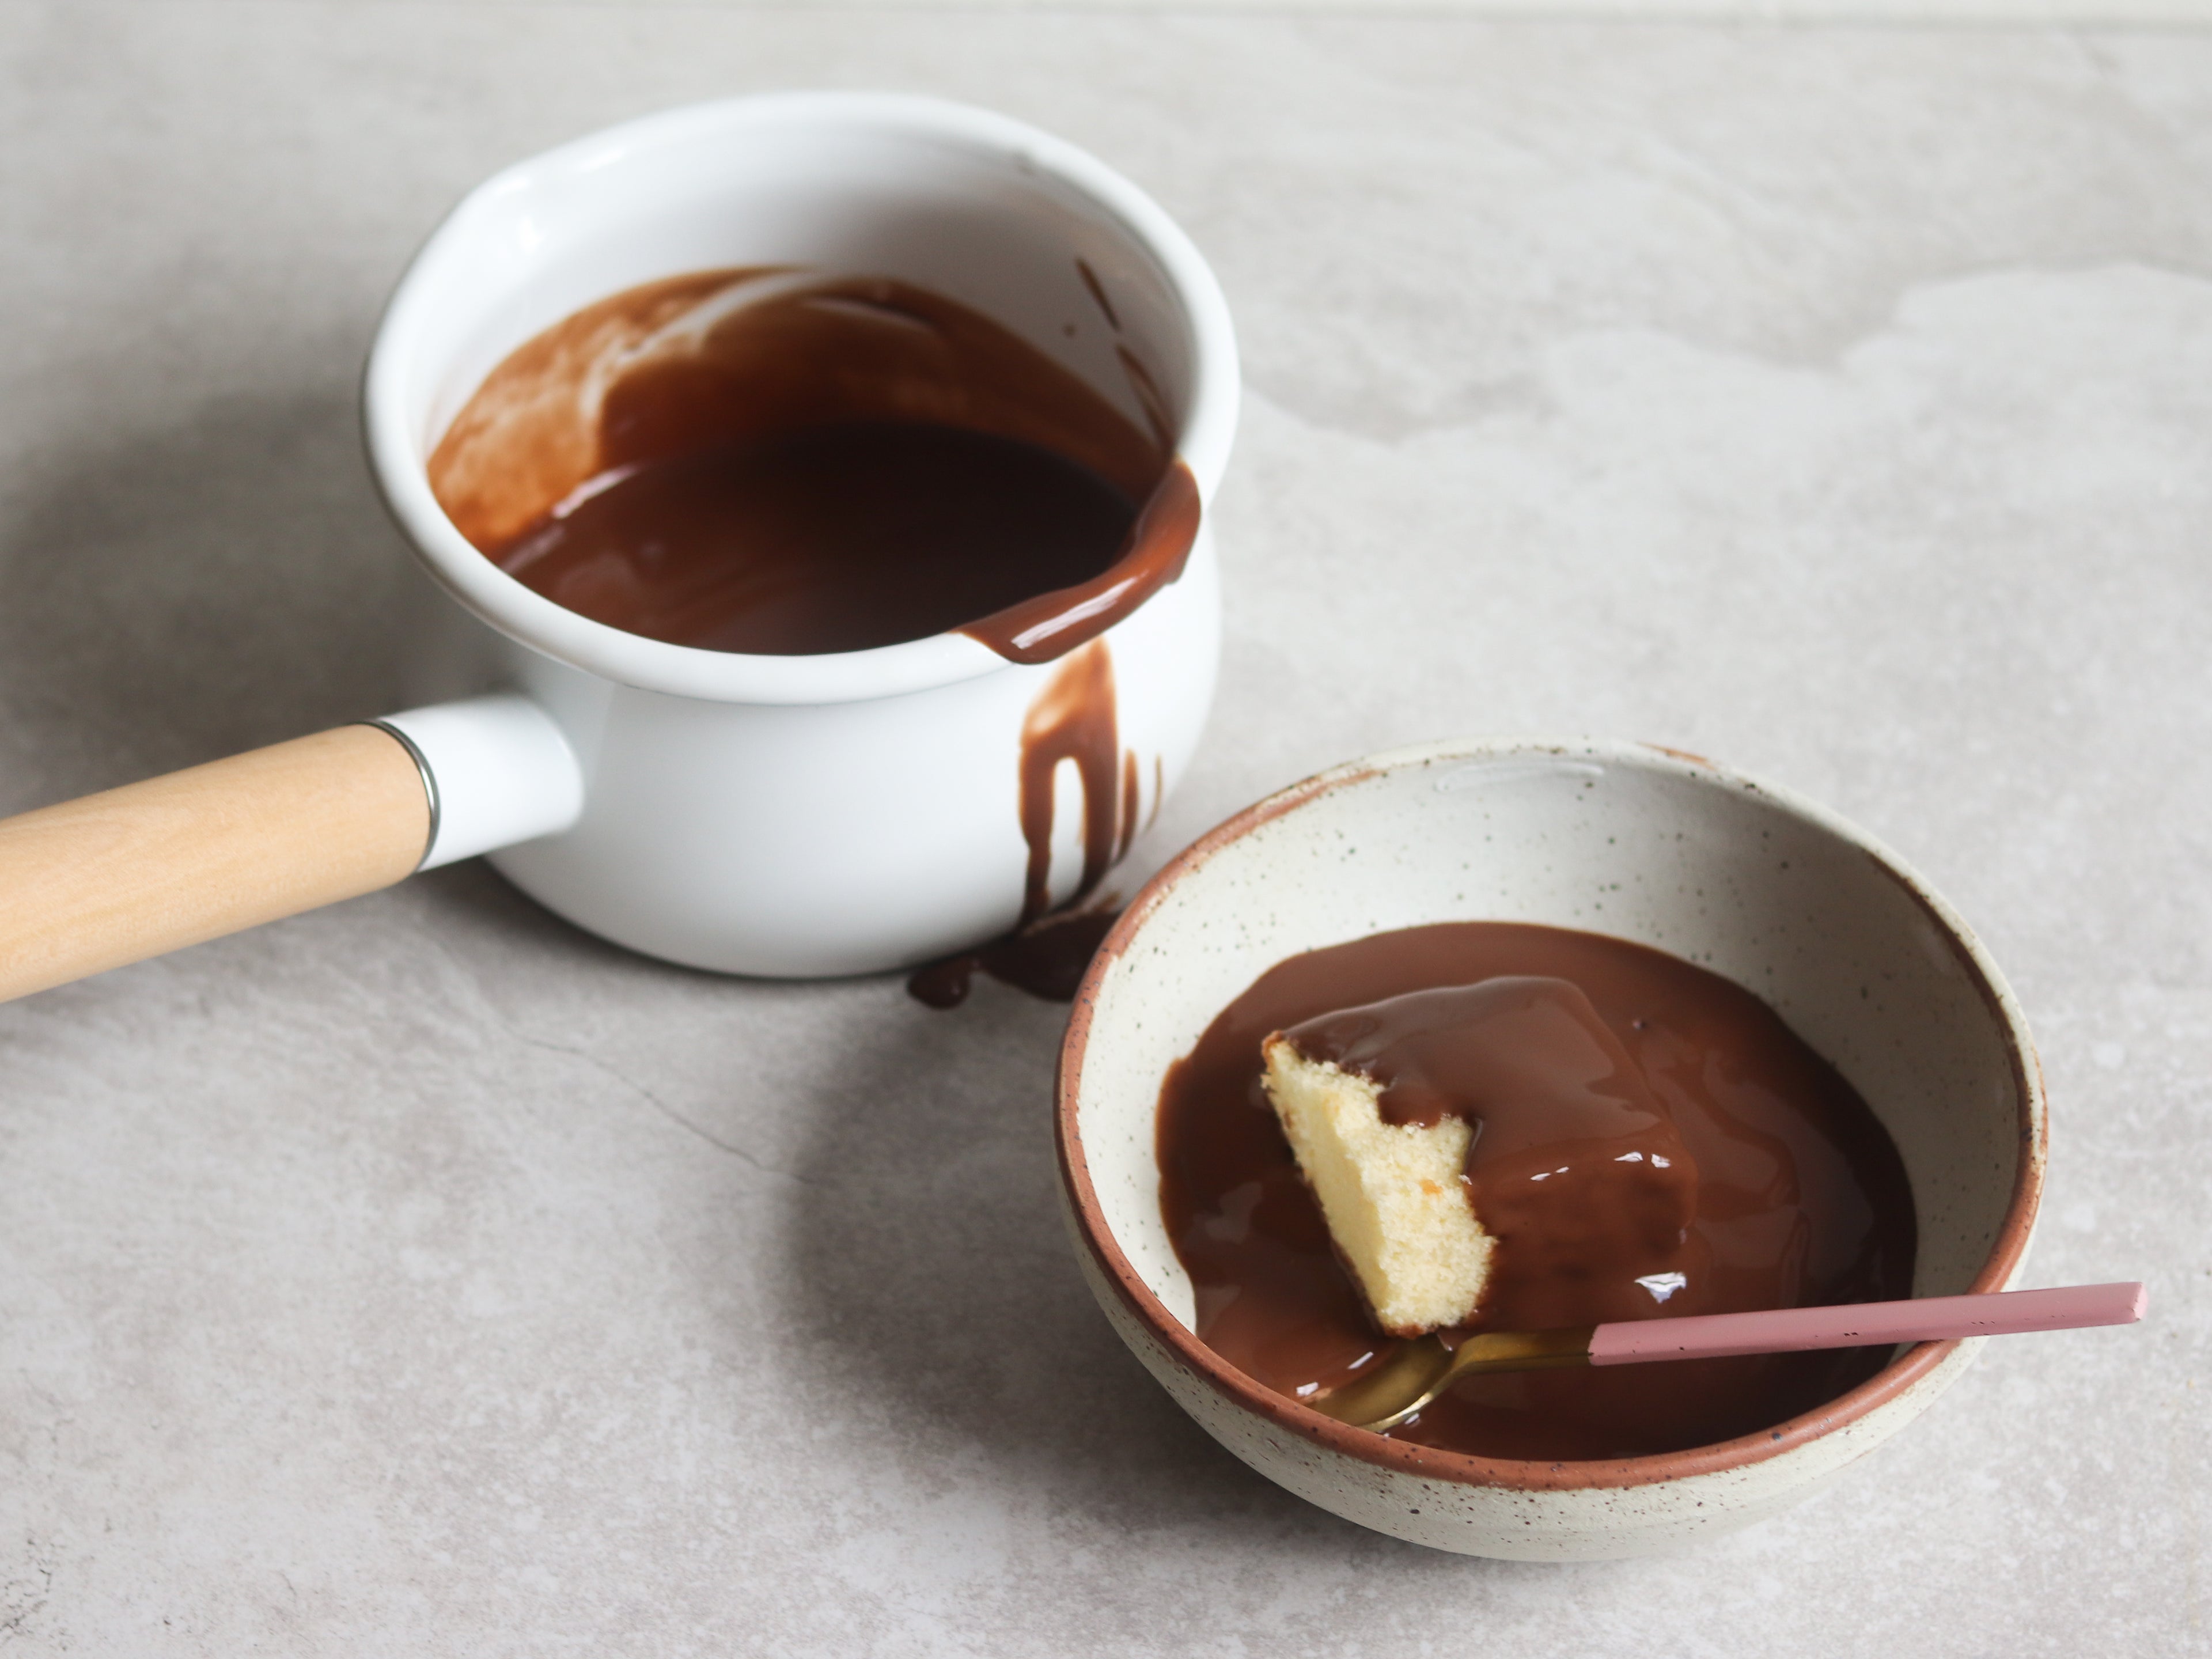 Chocolate Custard next to a bowl of sponge cake covered in chocolate custard, with a spoon ready to serve